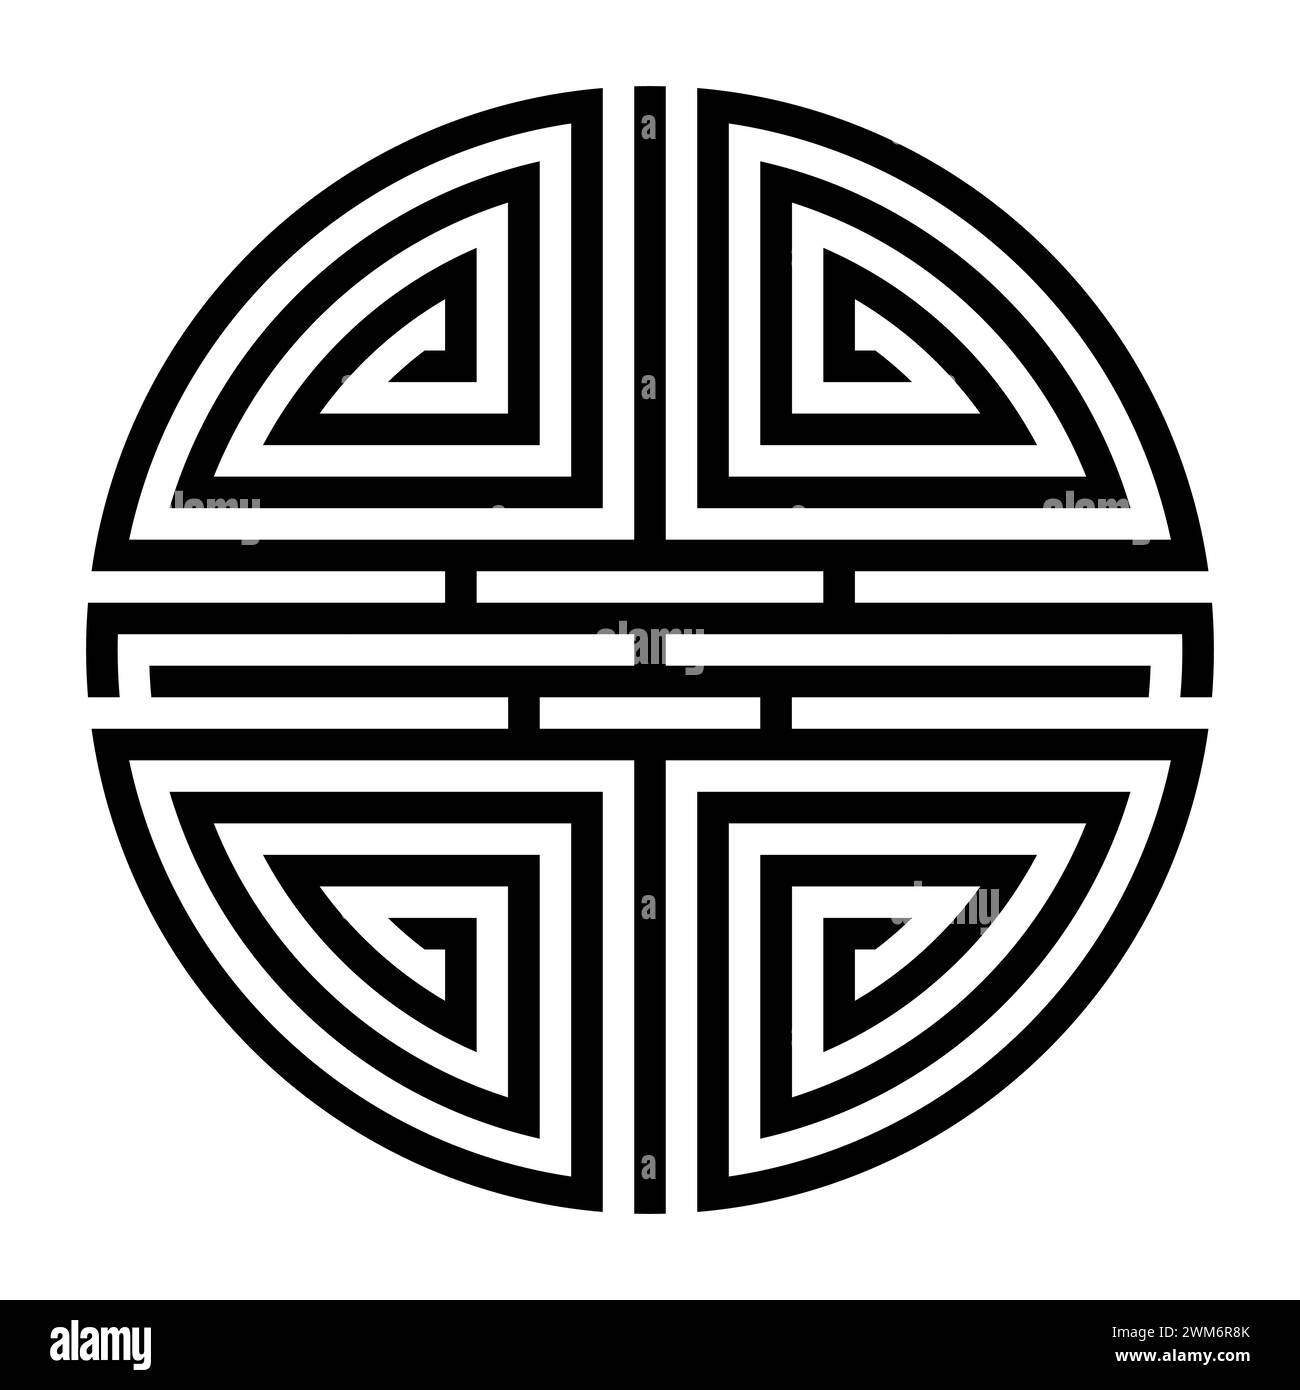 Shou, variation of the Chinese symbol for longevity. A long life is a blessing in Chinese traditional thought, symbolized by Shou Xing. Stock Photo